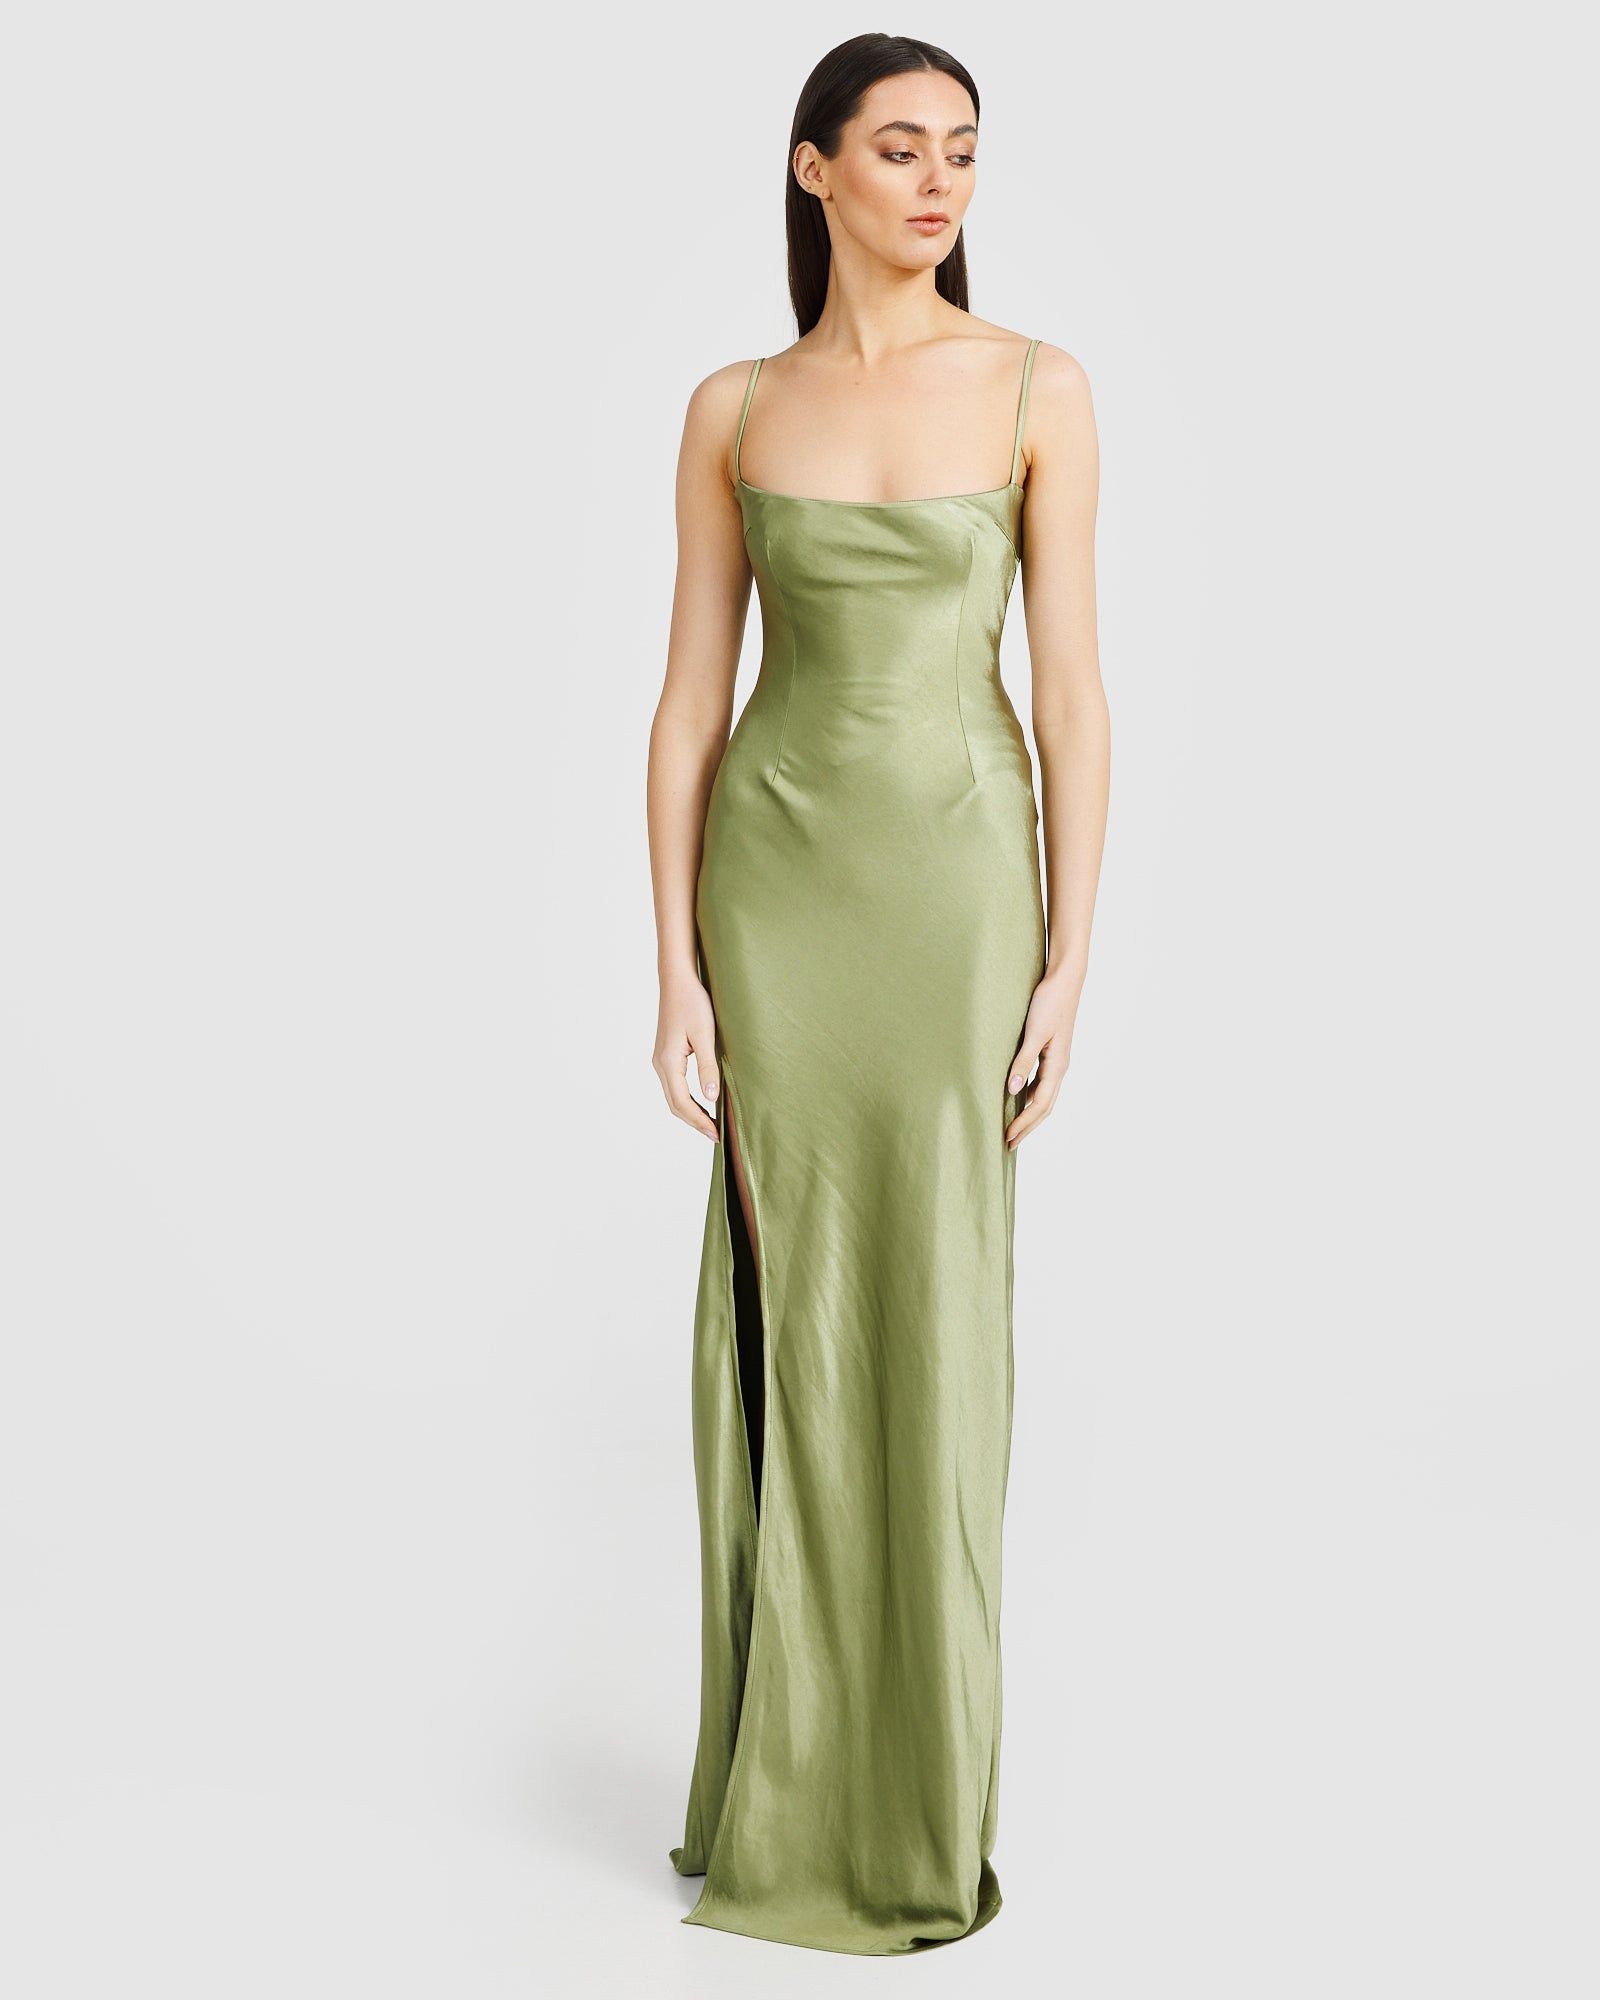 How to Style Satin Maxi Dress: Top 13 Elegant Outfit Ideas for Women